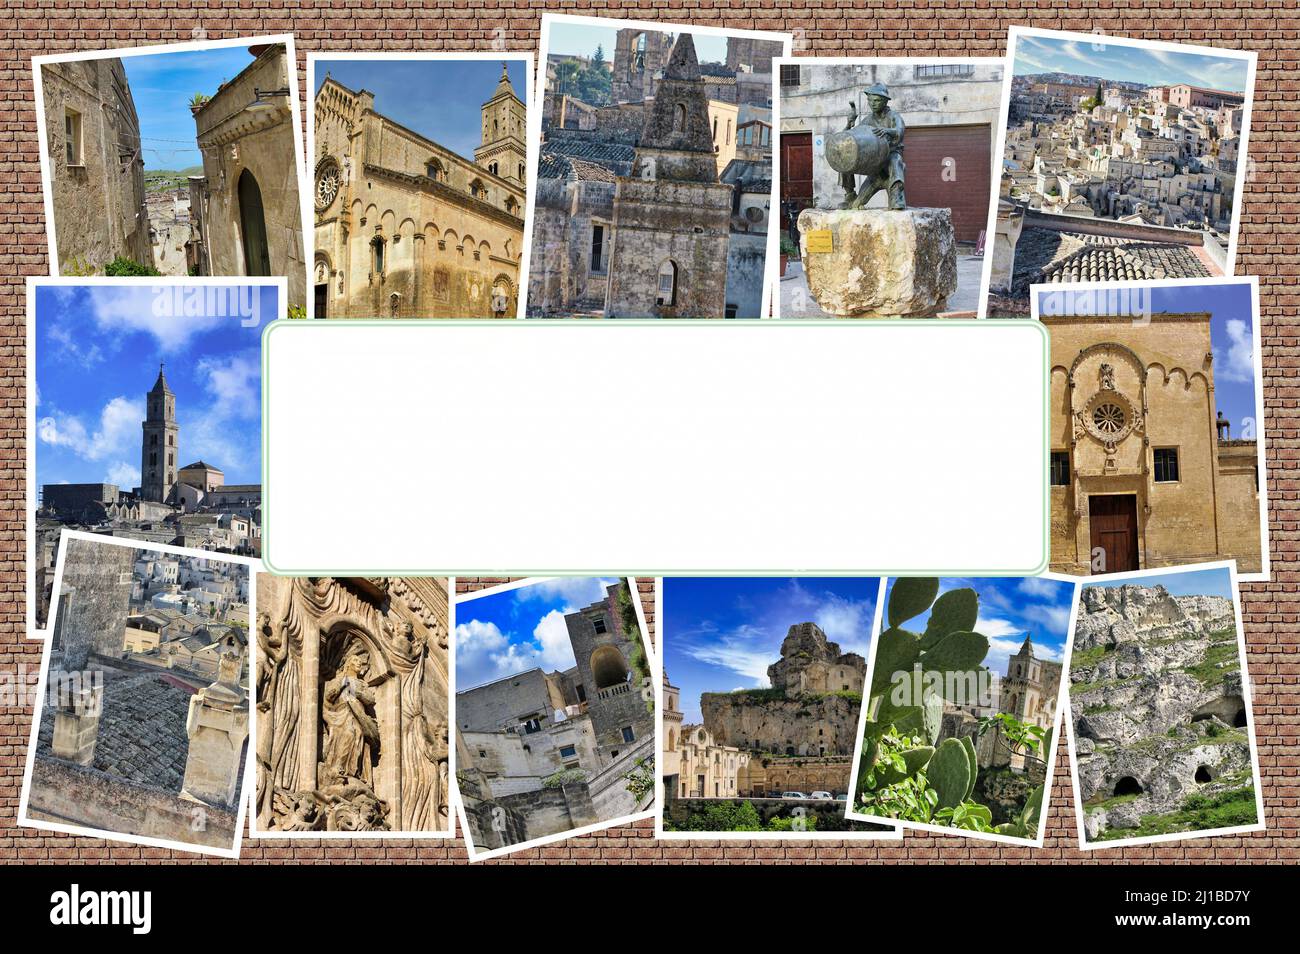 Matera, a World Heritage Site, is one of the oldest cities in the world. In 2019 it was awarded the title of European Capital of Culture. Stock Photo